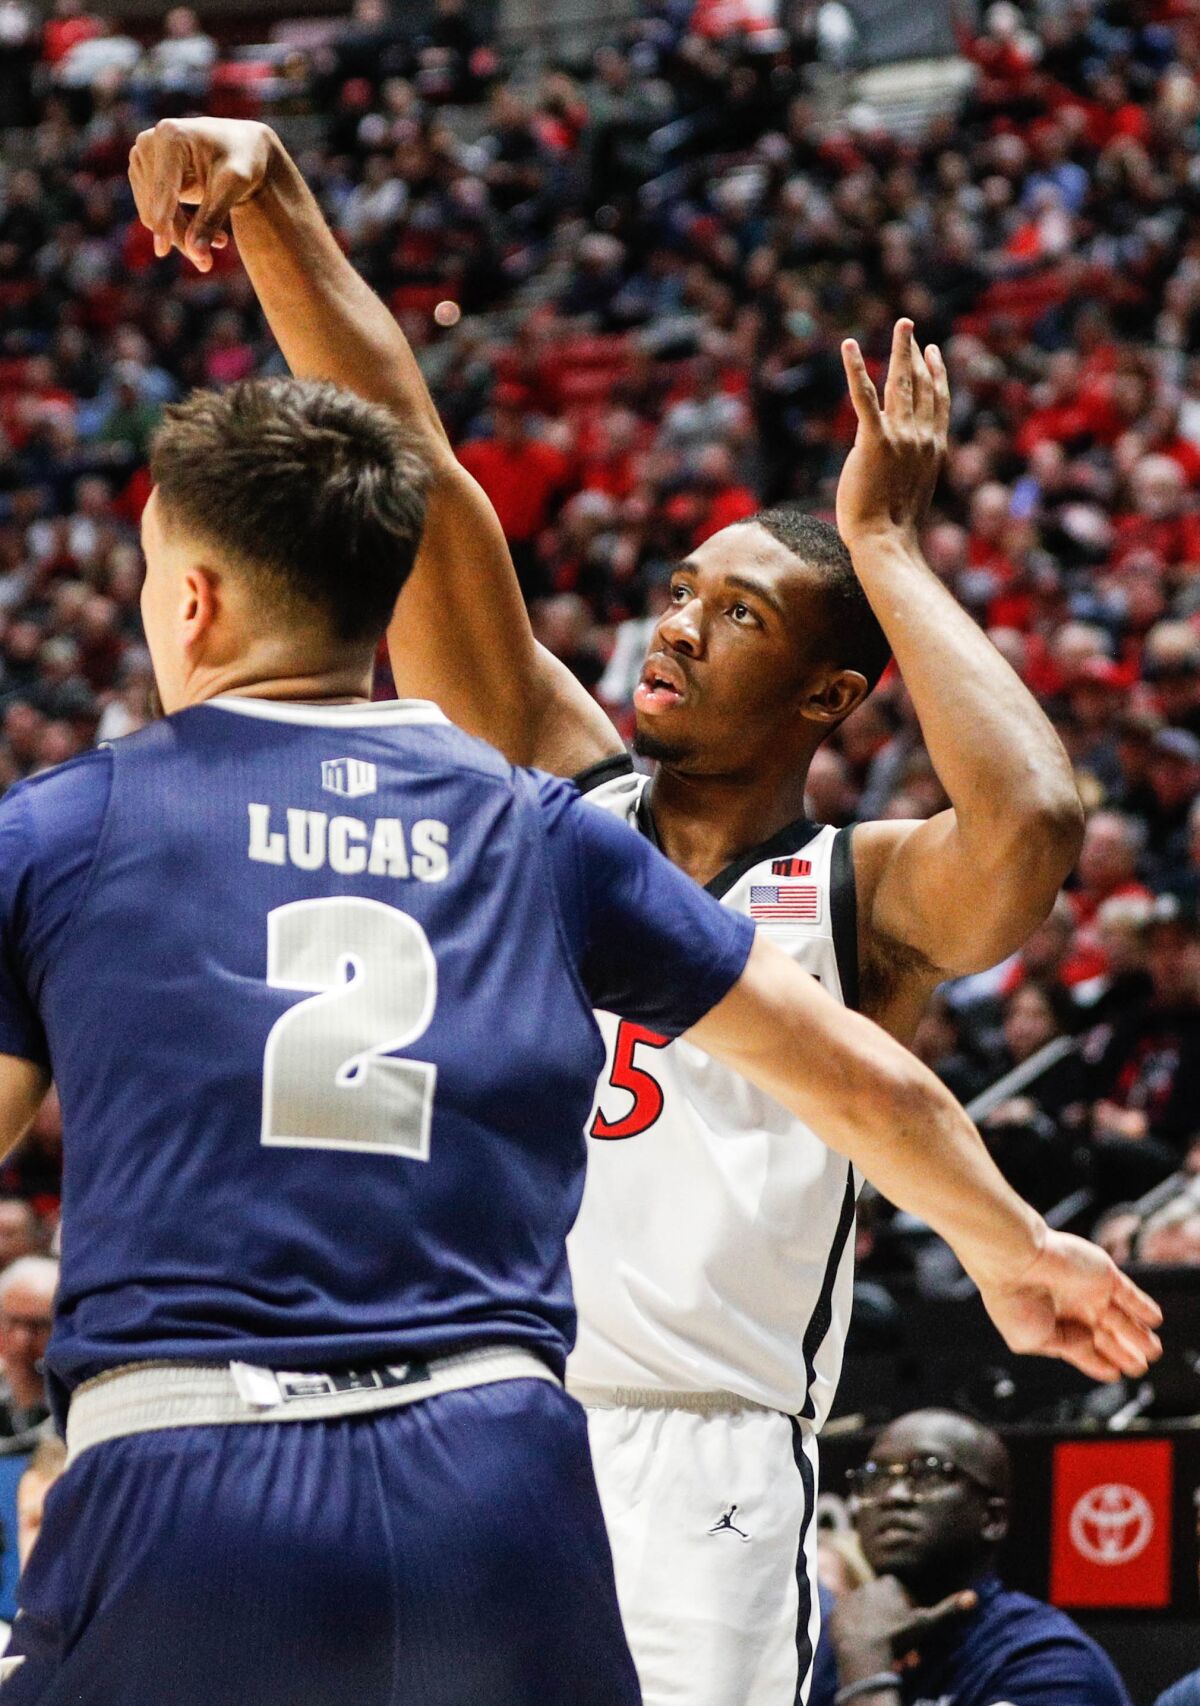 Nevada's Jarod Lucas, seen guarding SDSU's Lamont Butler earlier this season, has a well-earned reputation for flopping.